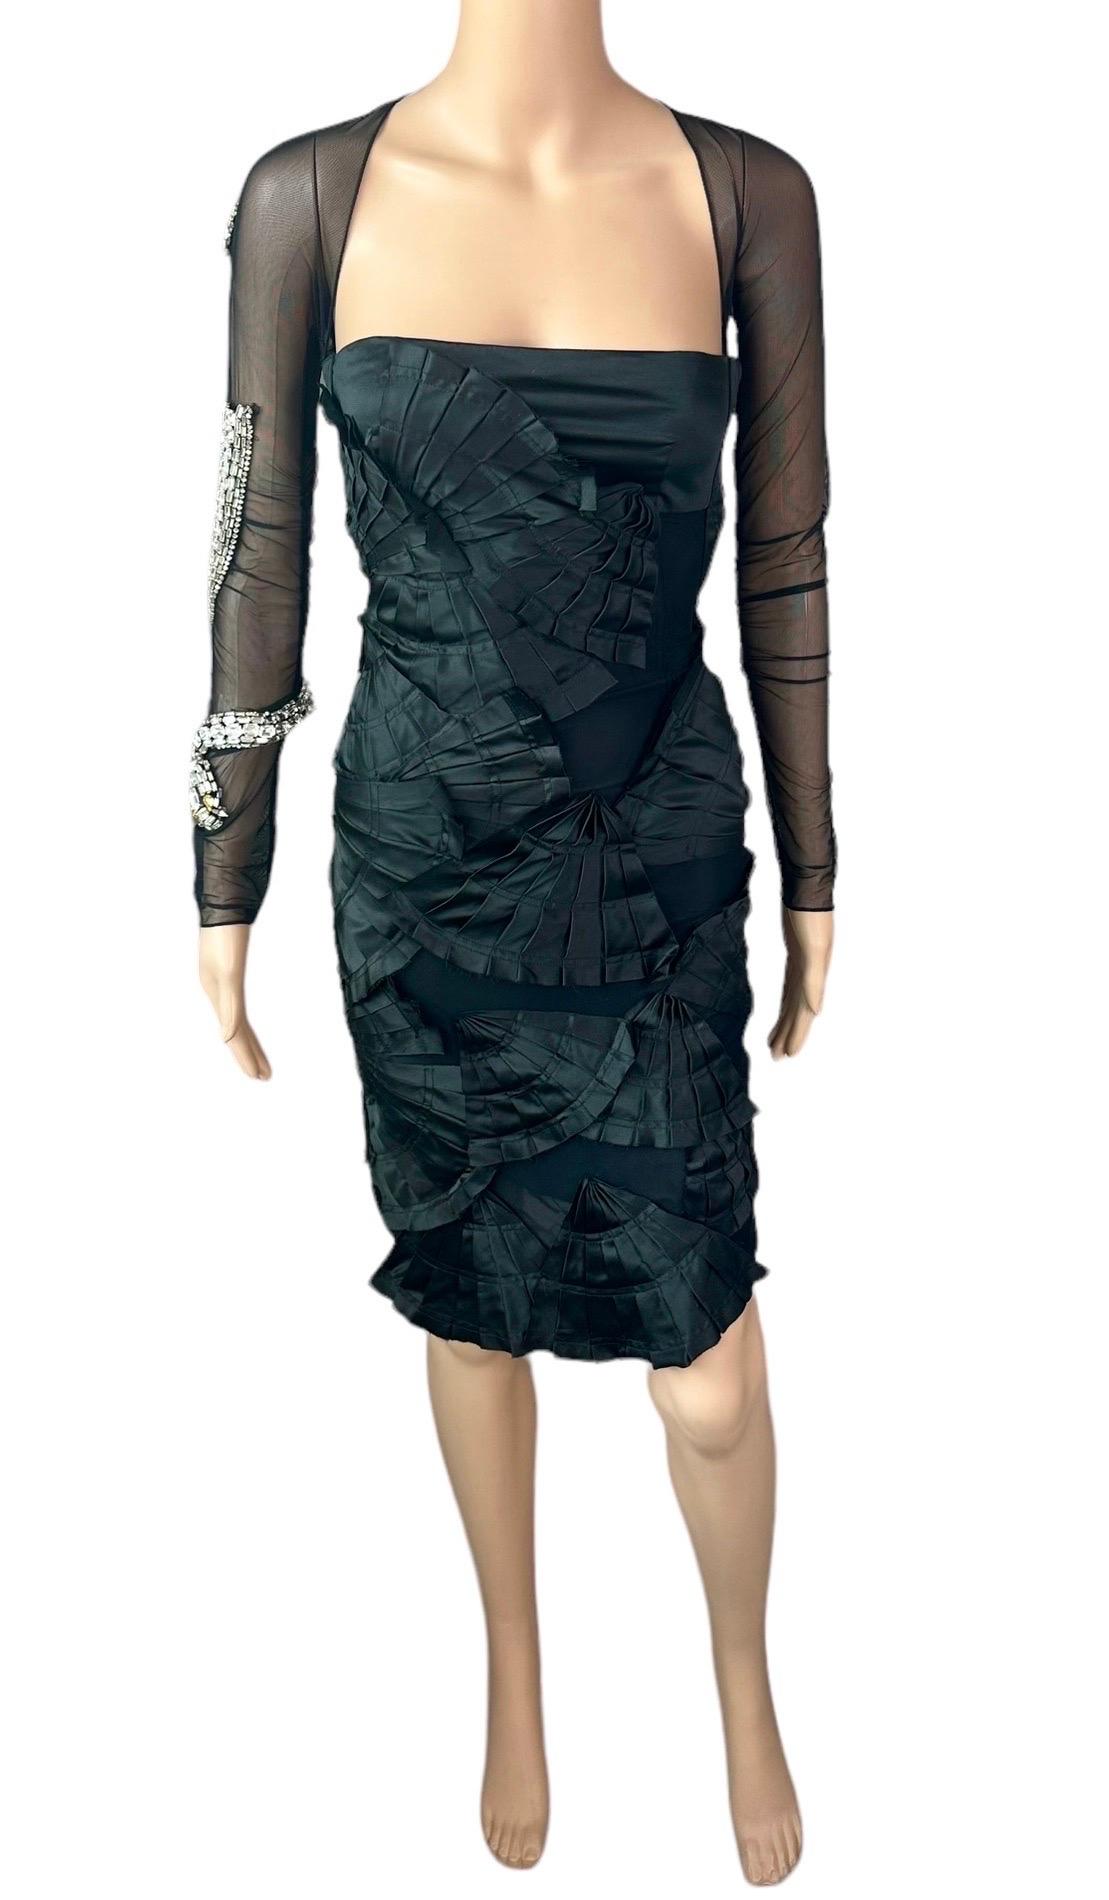 Tom Ford for Gucci S/S 2004 Runway Embellished Snake Sheer Cutout Black Dress For Sale 4